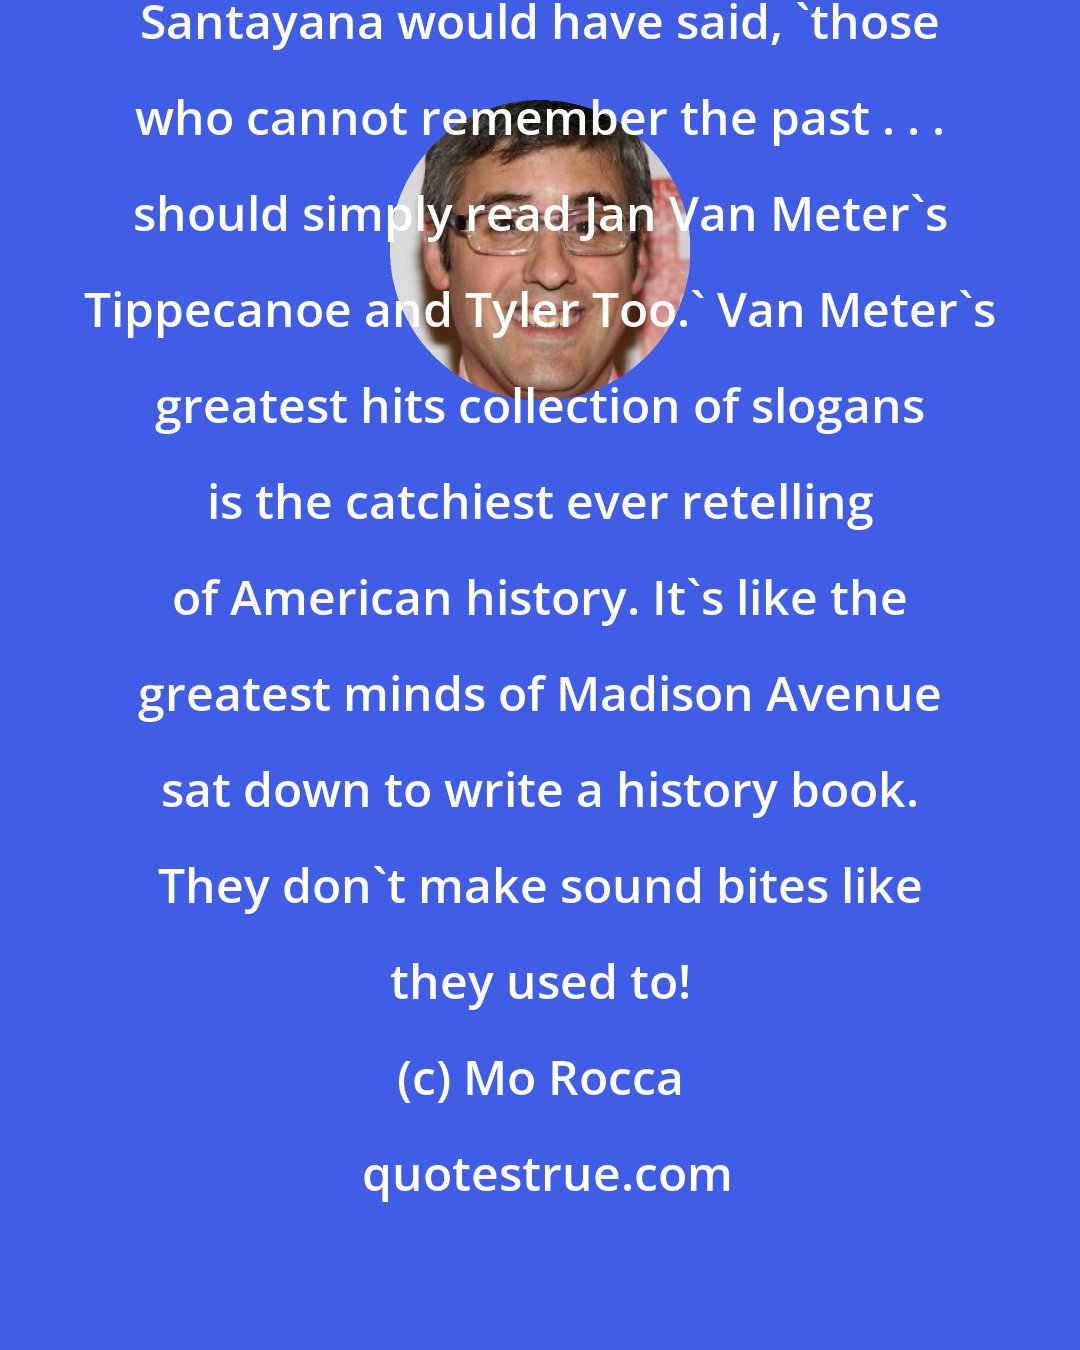 Mo Rocca: As the great philosopher George Santayana would have said, 'those who cannot remember the past . . . should simply read Jan Van Meter's Tippecanoe and Tyler Too.' Van Meter's greatest hits collection of slogans is the catchiest ever retelling of American history. It's like the greatest minds of Madison Avenue sat down to write a history book. They don't make sound bites like they used to!